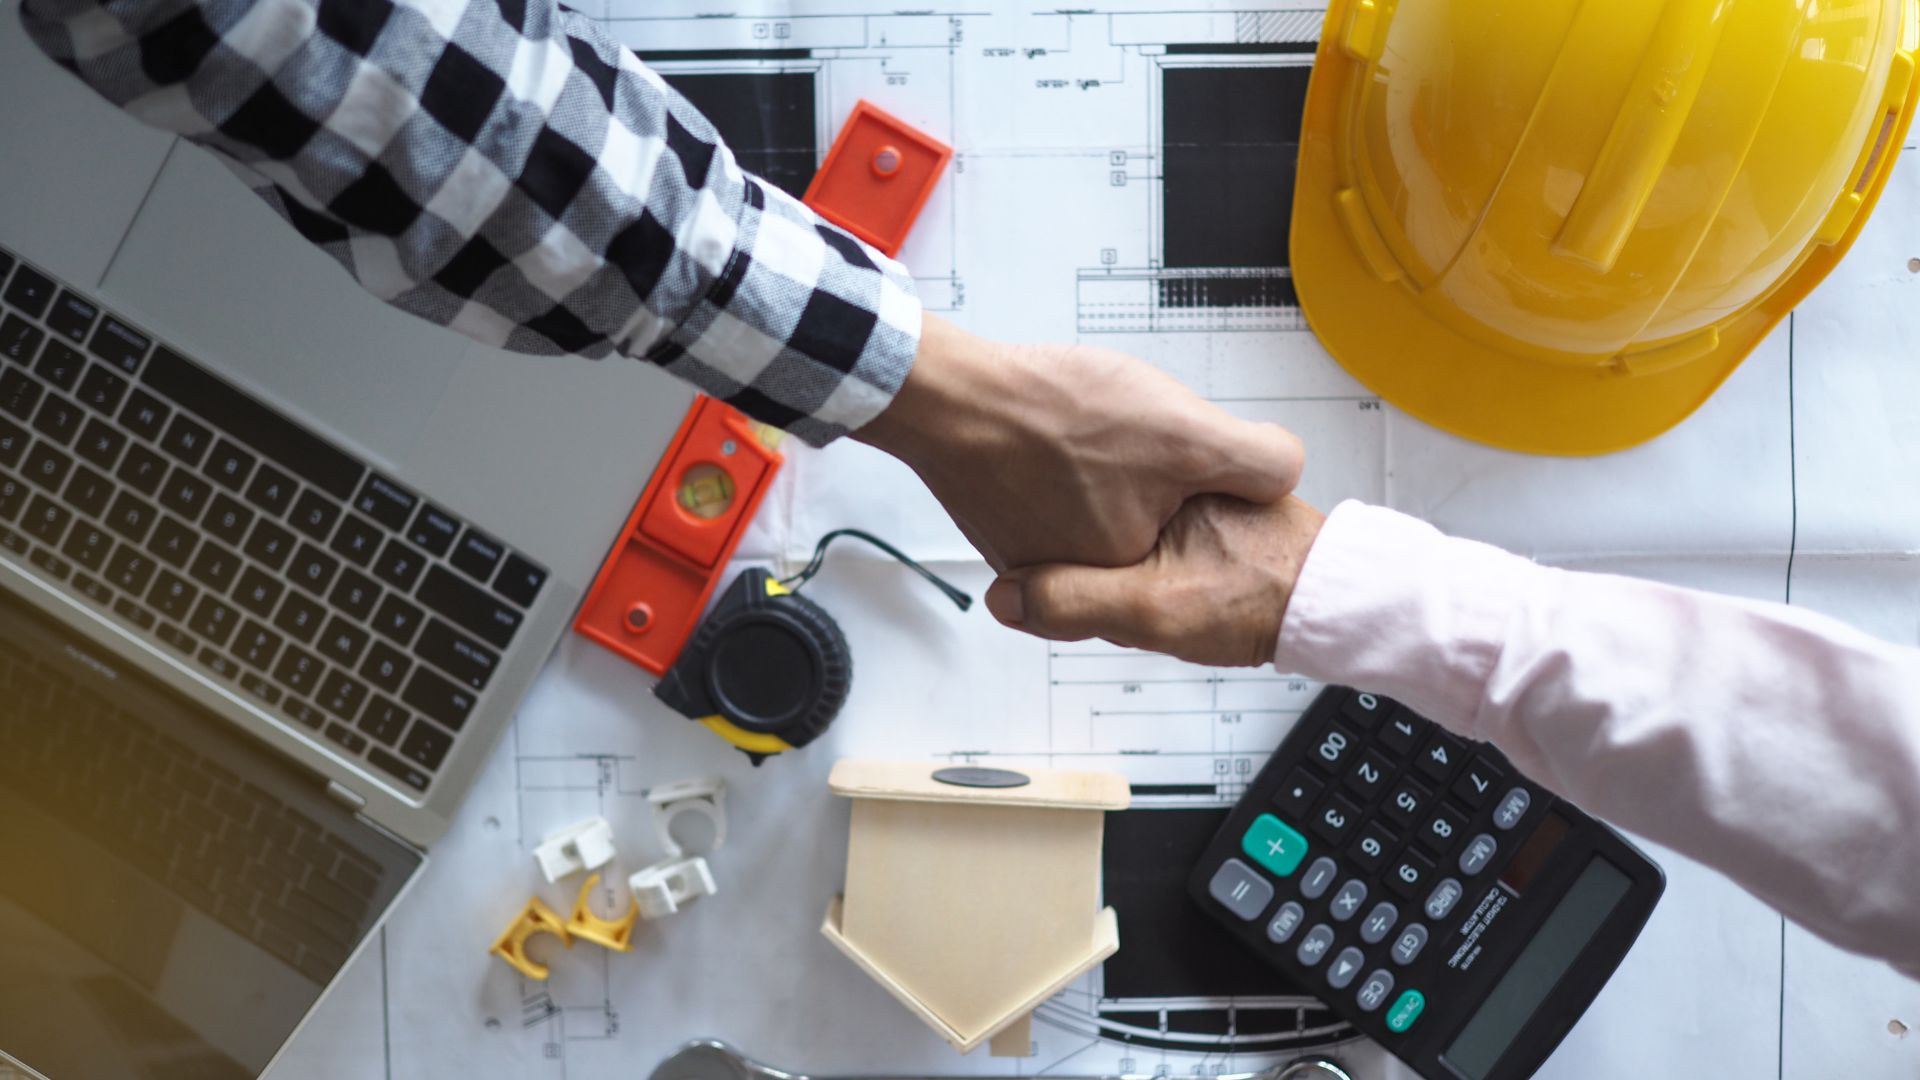 Two people shaking hands over a contract, hard hat, and calculator